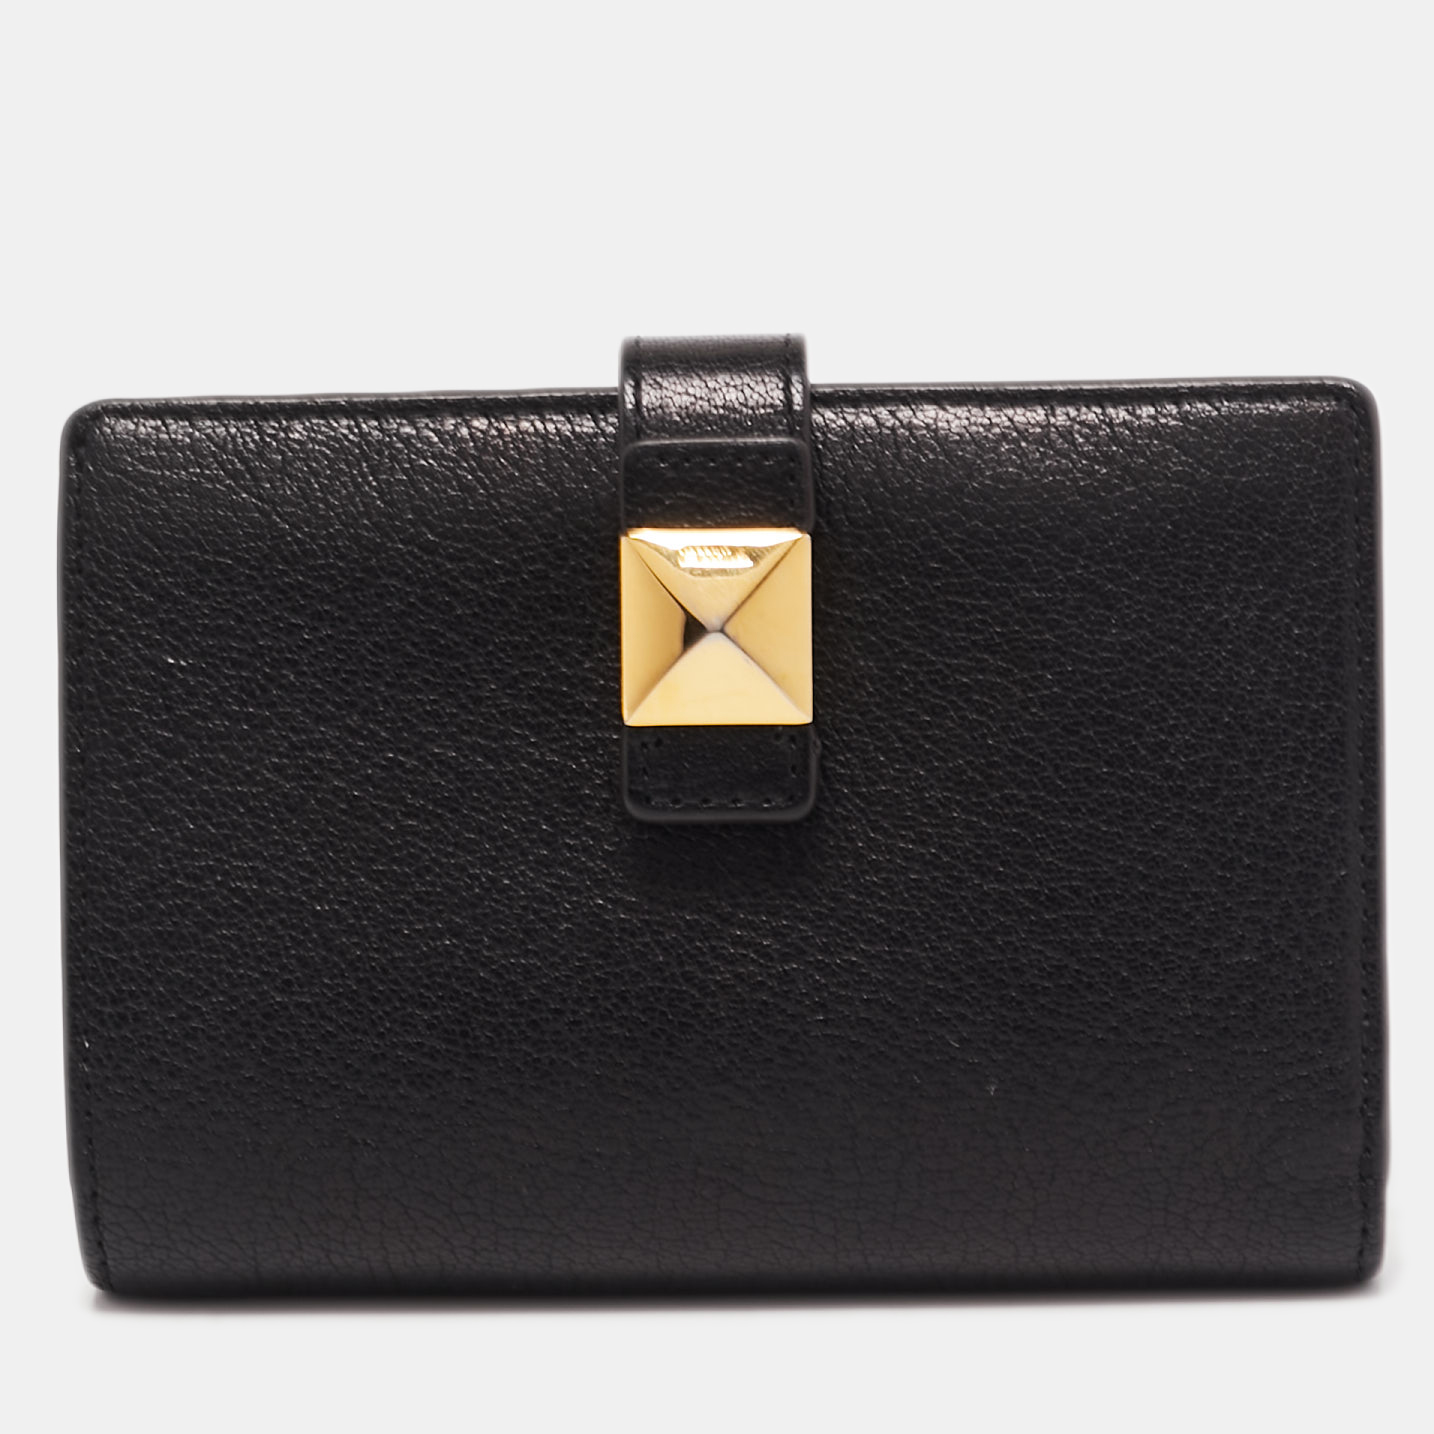 Pre-owned Furla Black Leather Stud Flap Compact Wallet